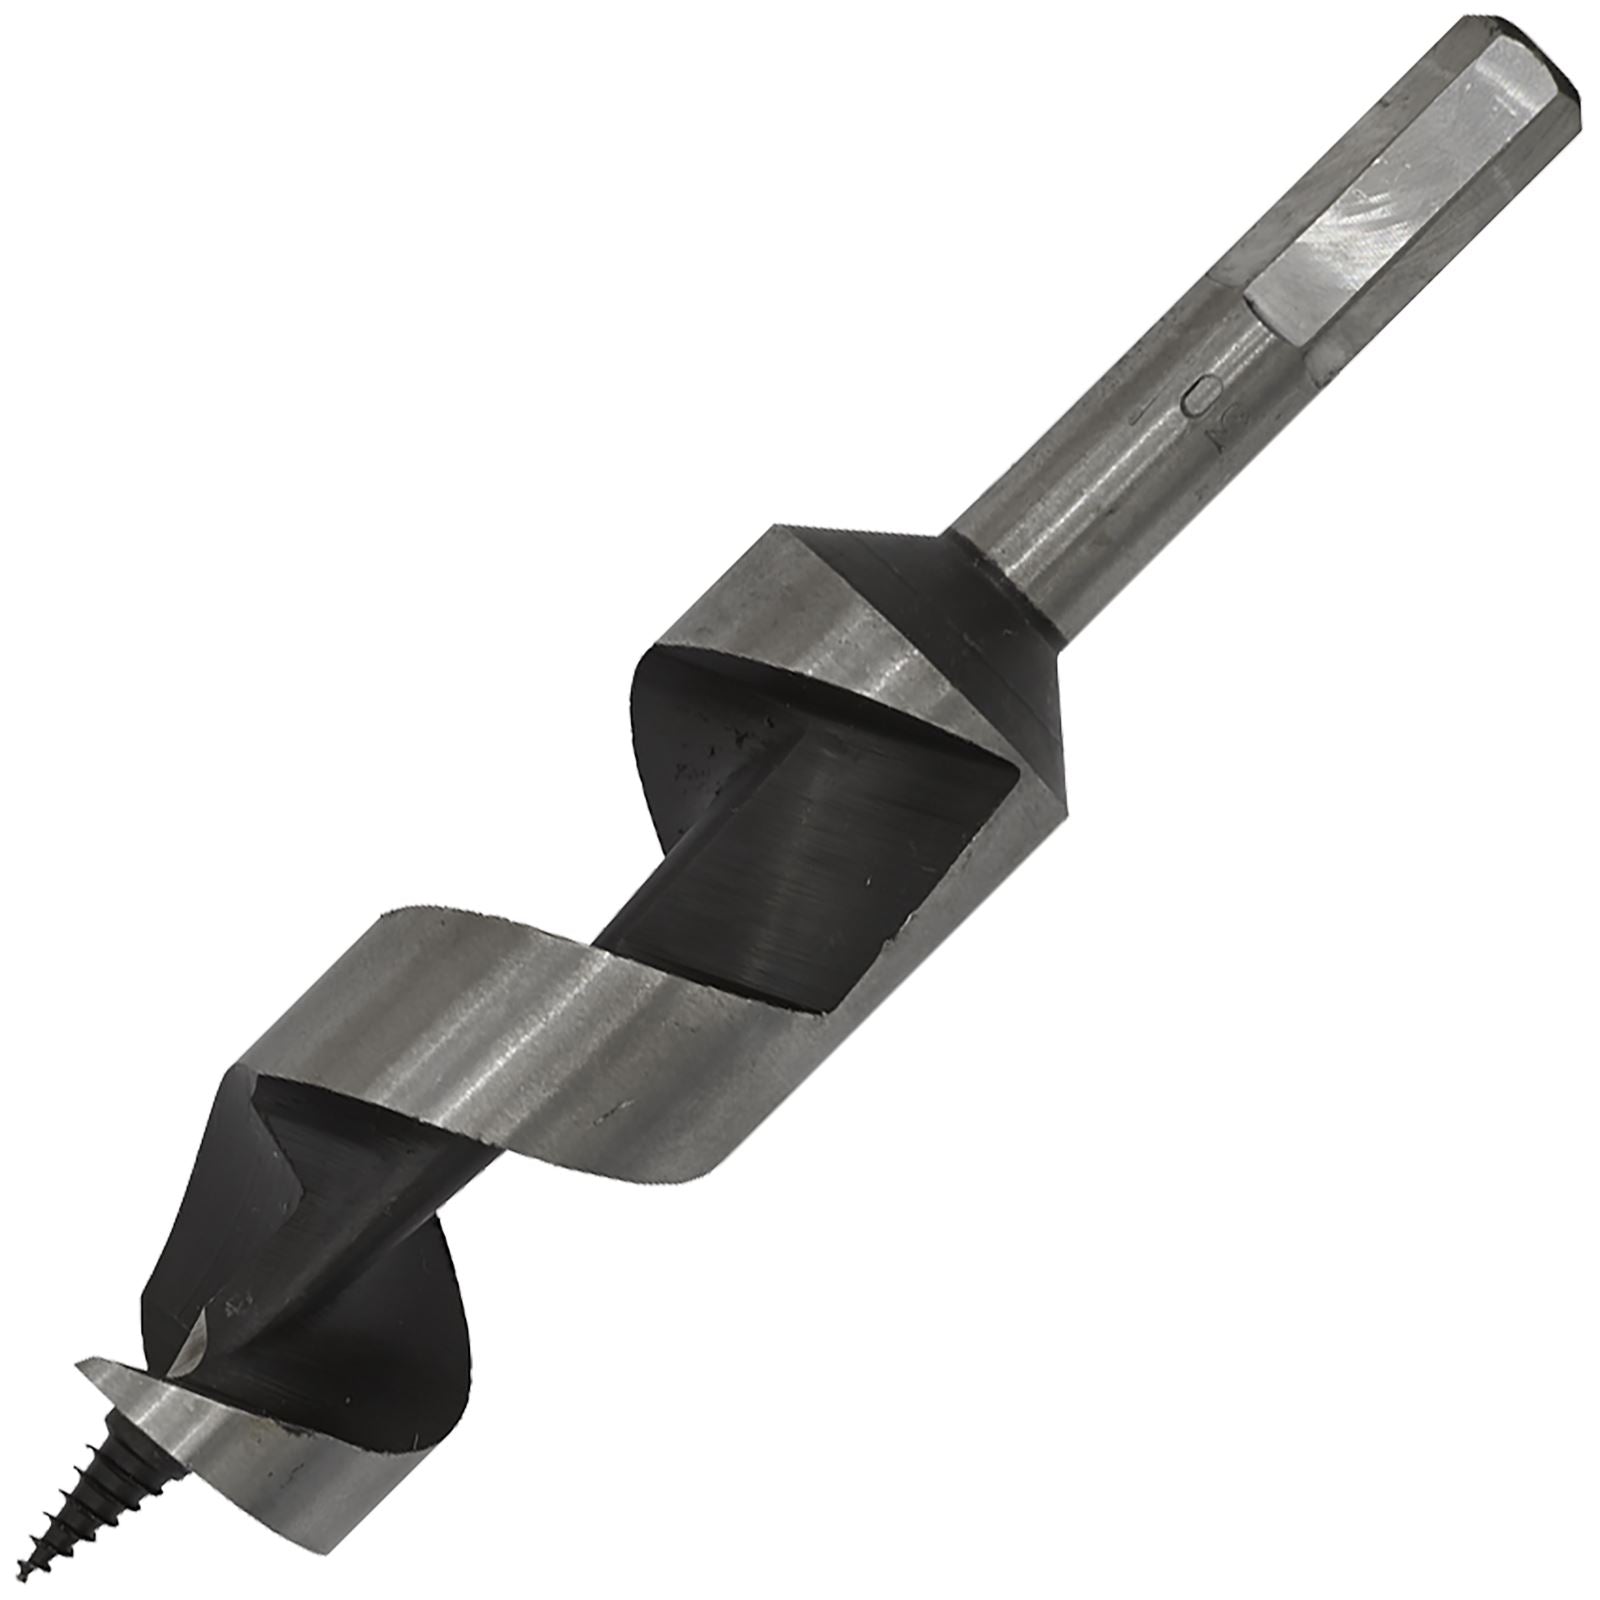 Worksafe by Sealey Auger Wood Drill Bit 30mm x 155mm